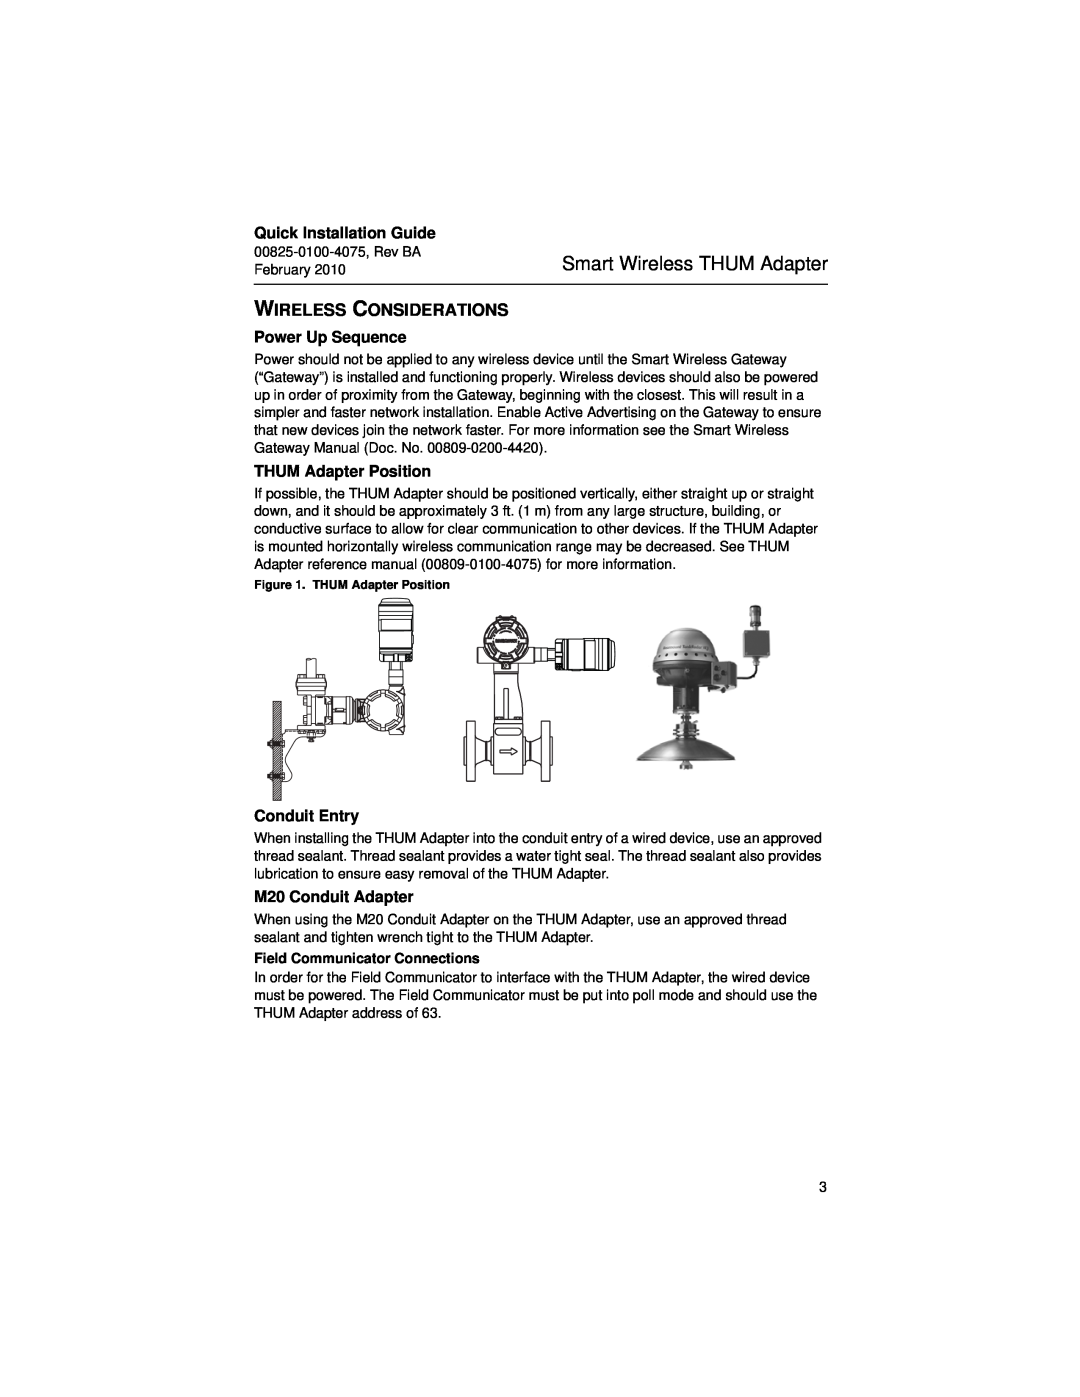 Emerson 00825-0100-4075 manual Wireless Considerations, Power Up Sequence, THUM Adapter Position, Conduit Entry 